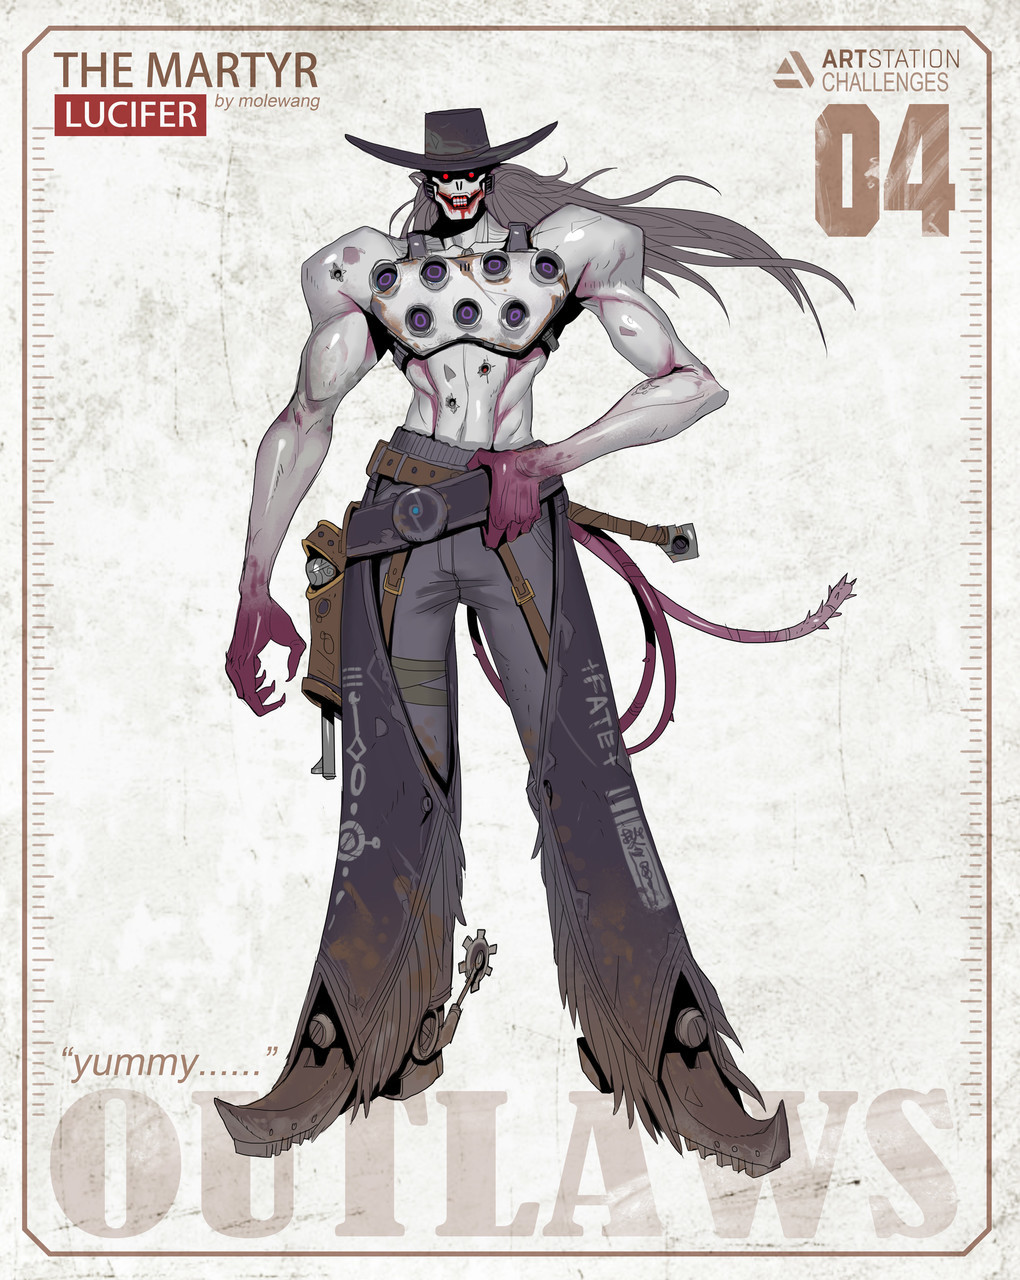 thecollectibles: Wild West - Character Design by  mole wang  